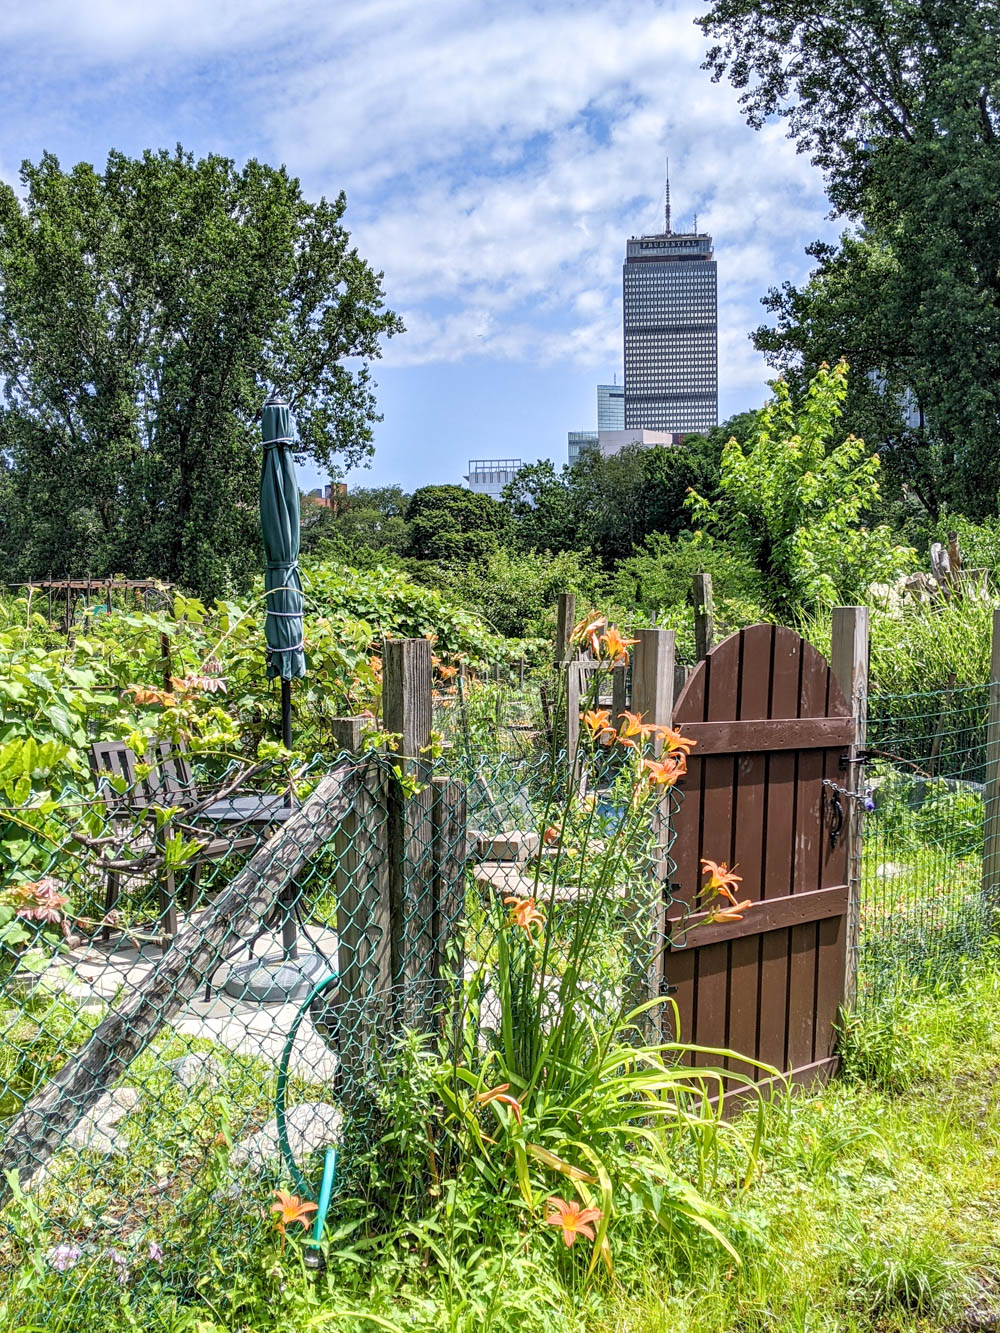 Fenway Victory Gardens in Boston, Massachusetts, one of the area's World War II-related sites